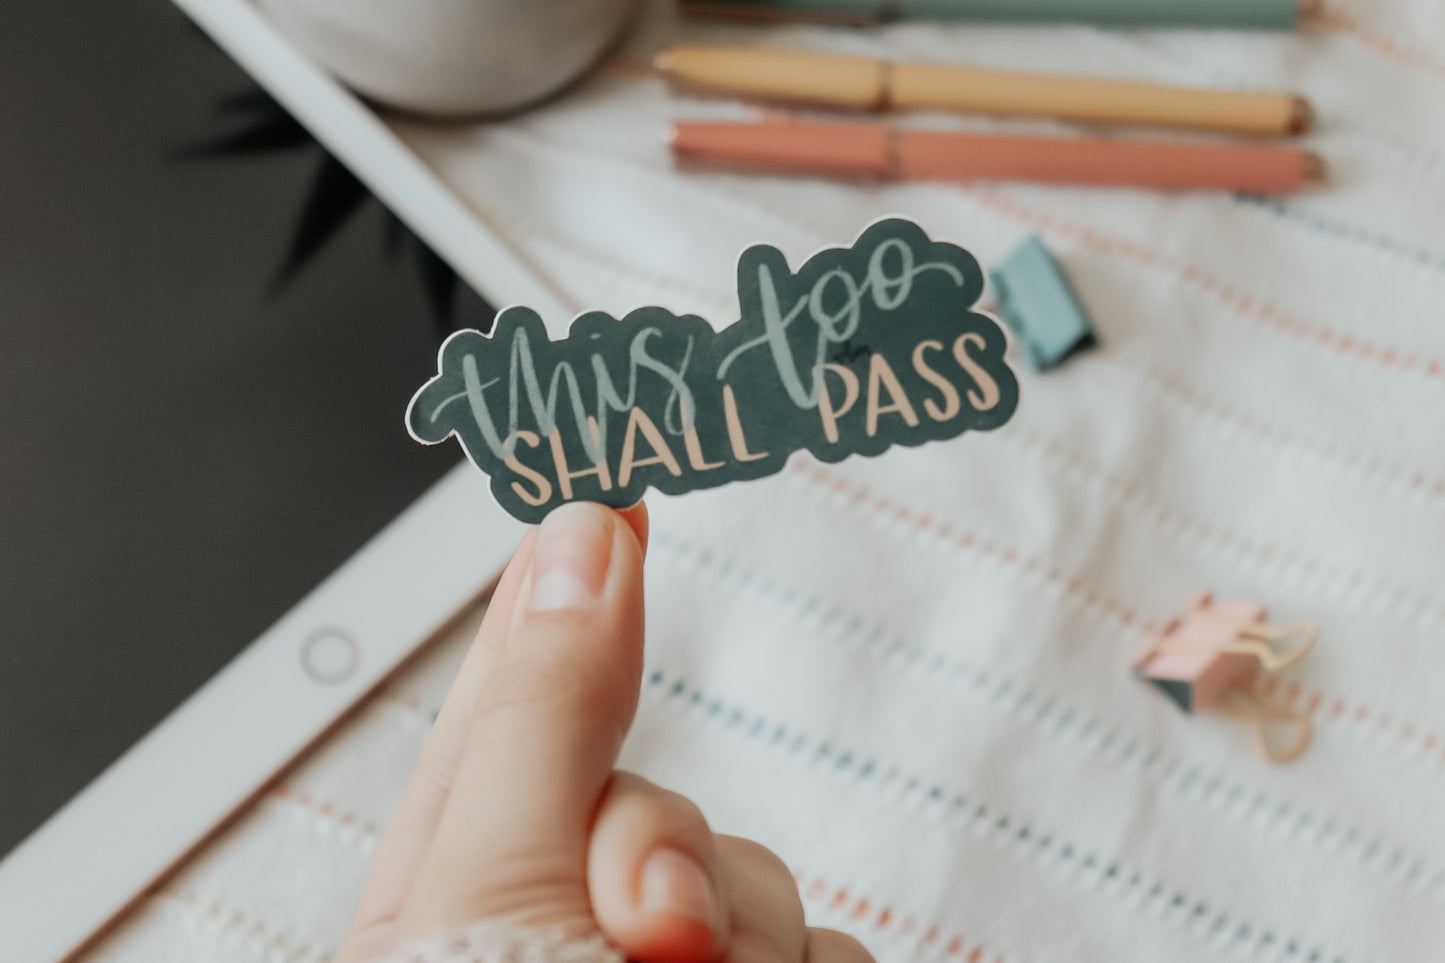 "This too shall pass" 3 x 3 handlettered sticker